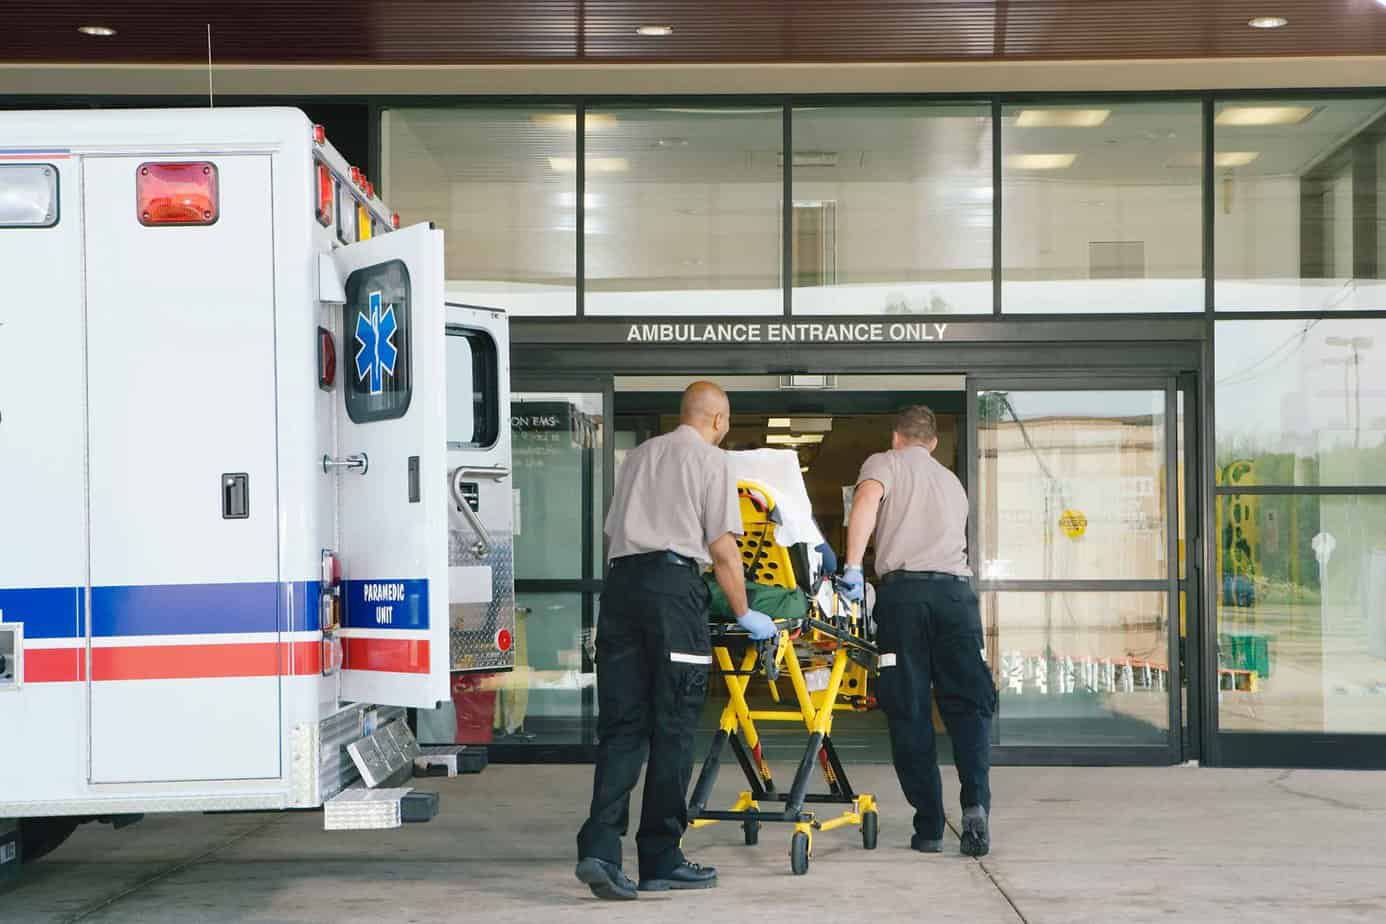 patient being wheeled into hospital on stretcher steered by paramedics